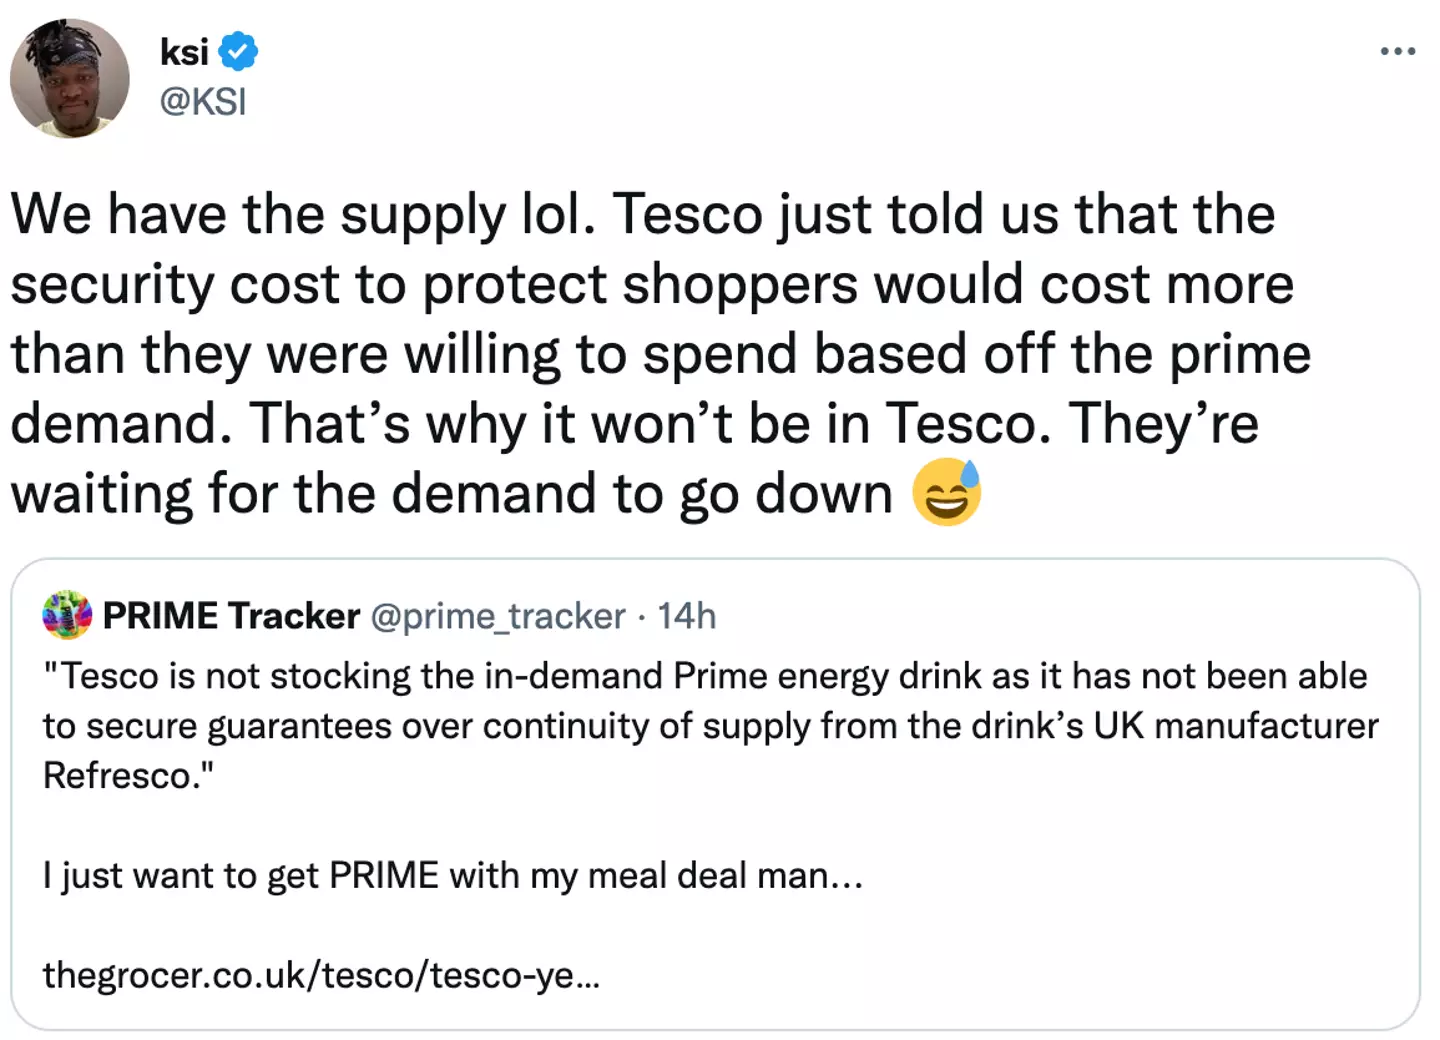 The YouTuber recently responded to a tweet about Tesco not selling Prime.